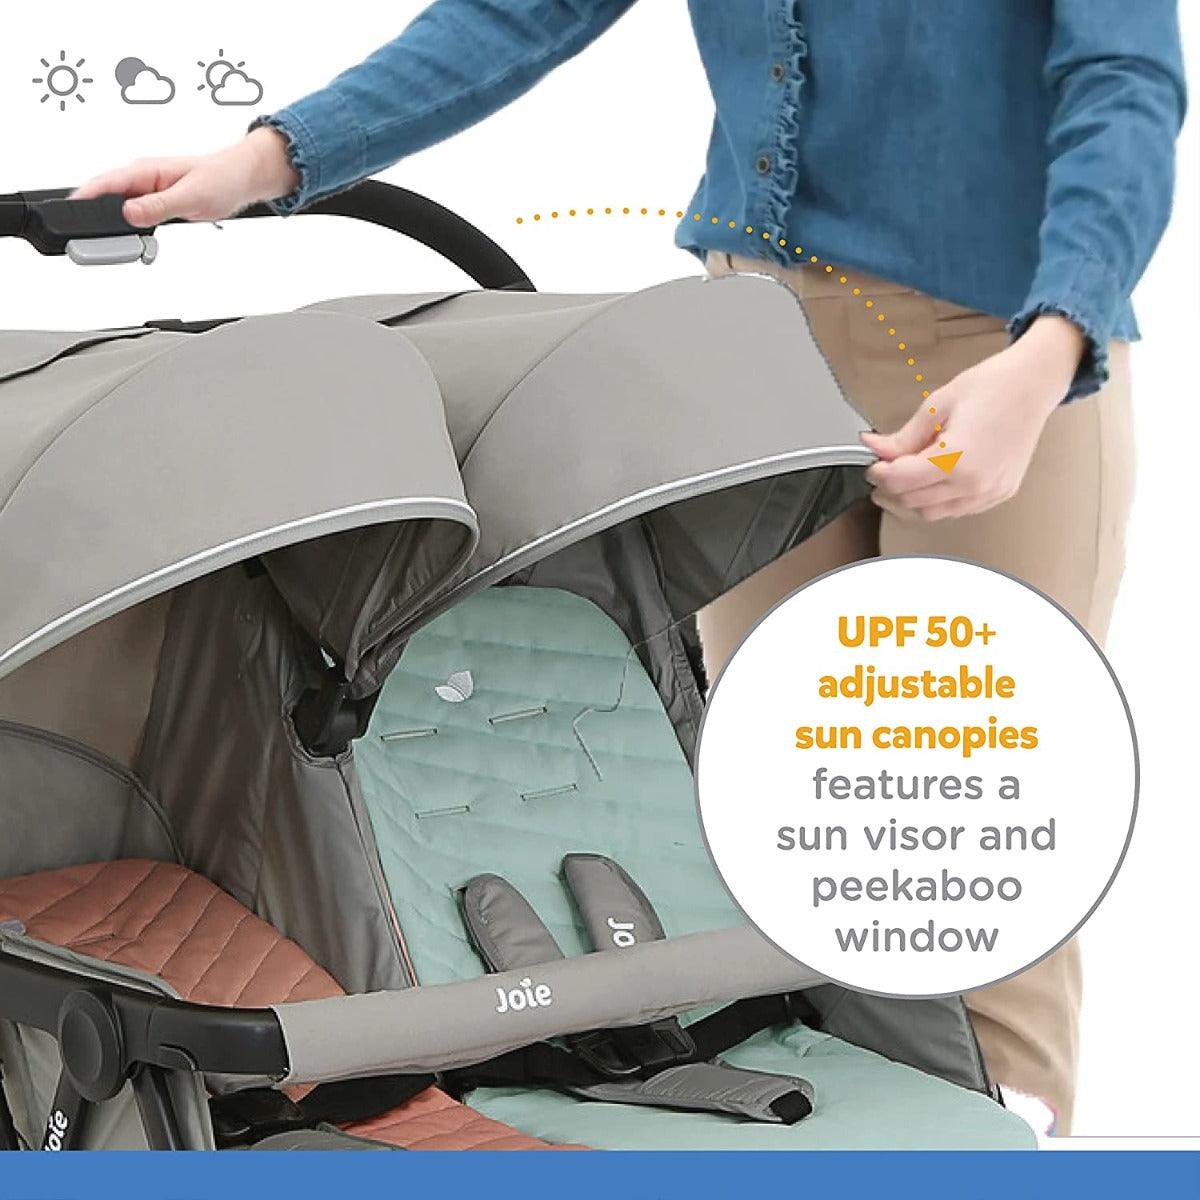 Joie Aire Twin Nectar & Mineral - Double Baby Stroller Rain Cover With Single Touch Brake for Ages 0-3 Years